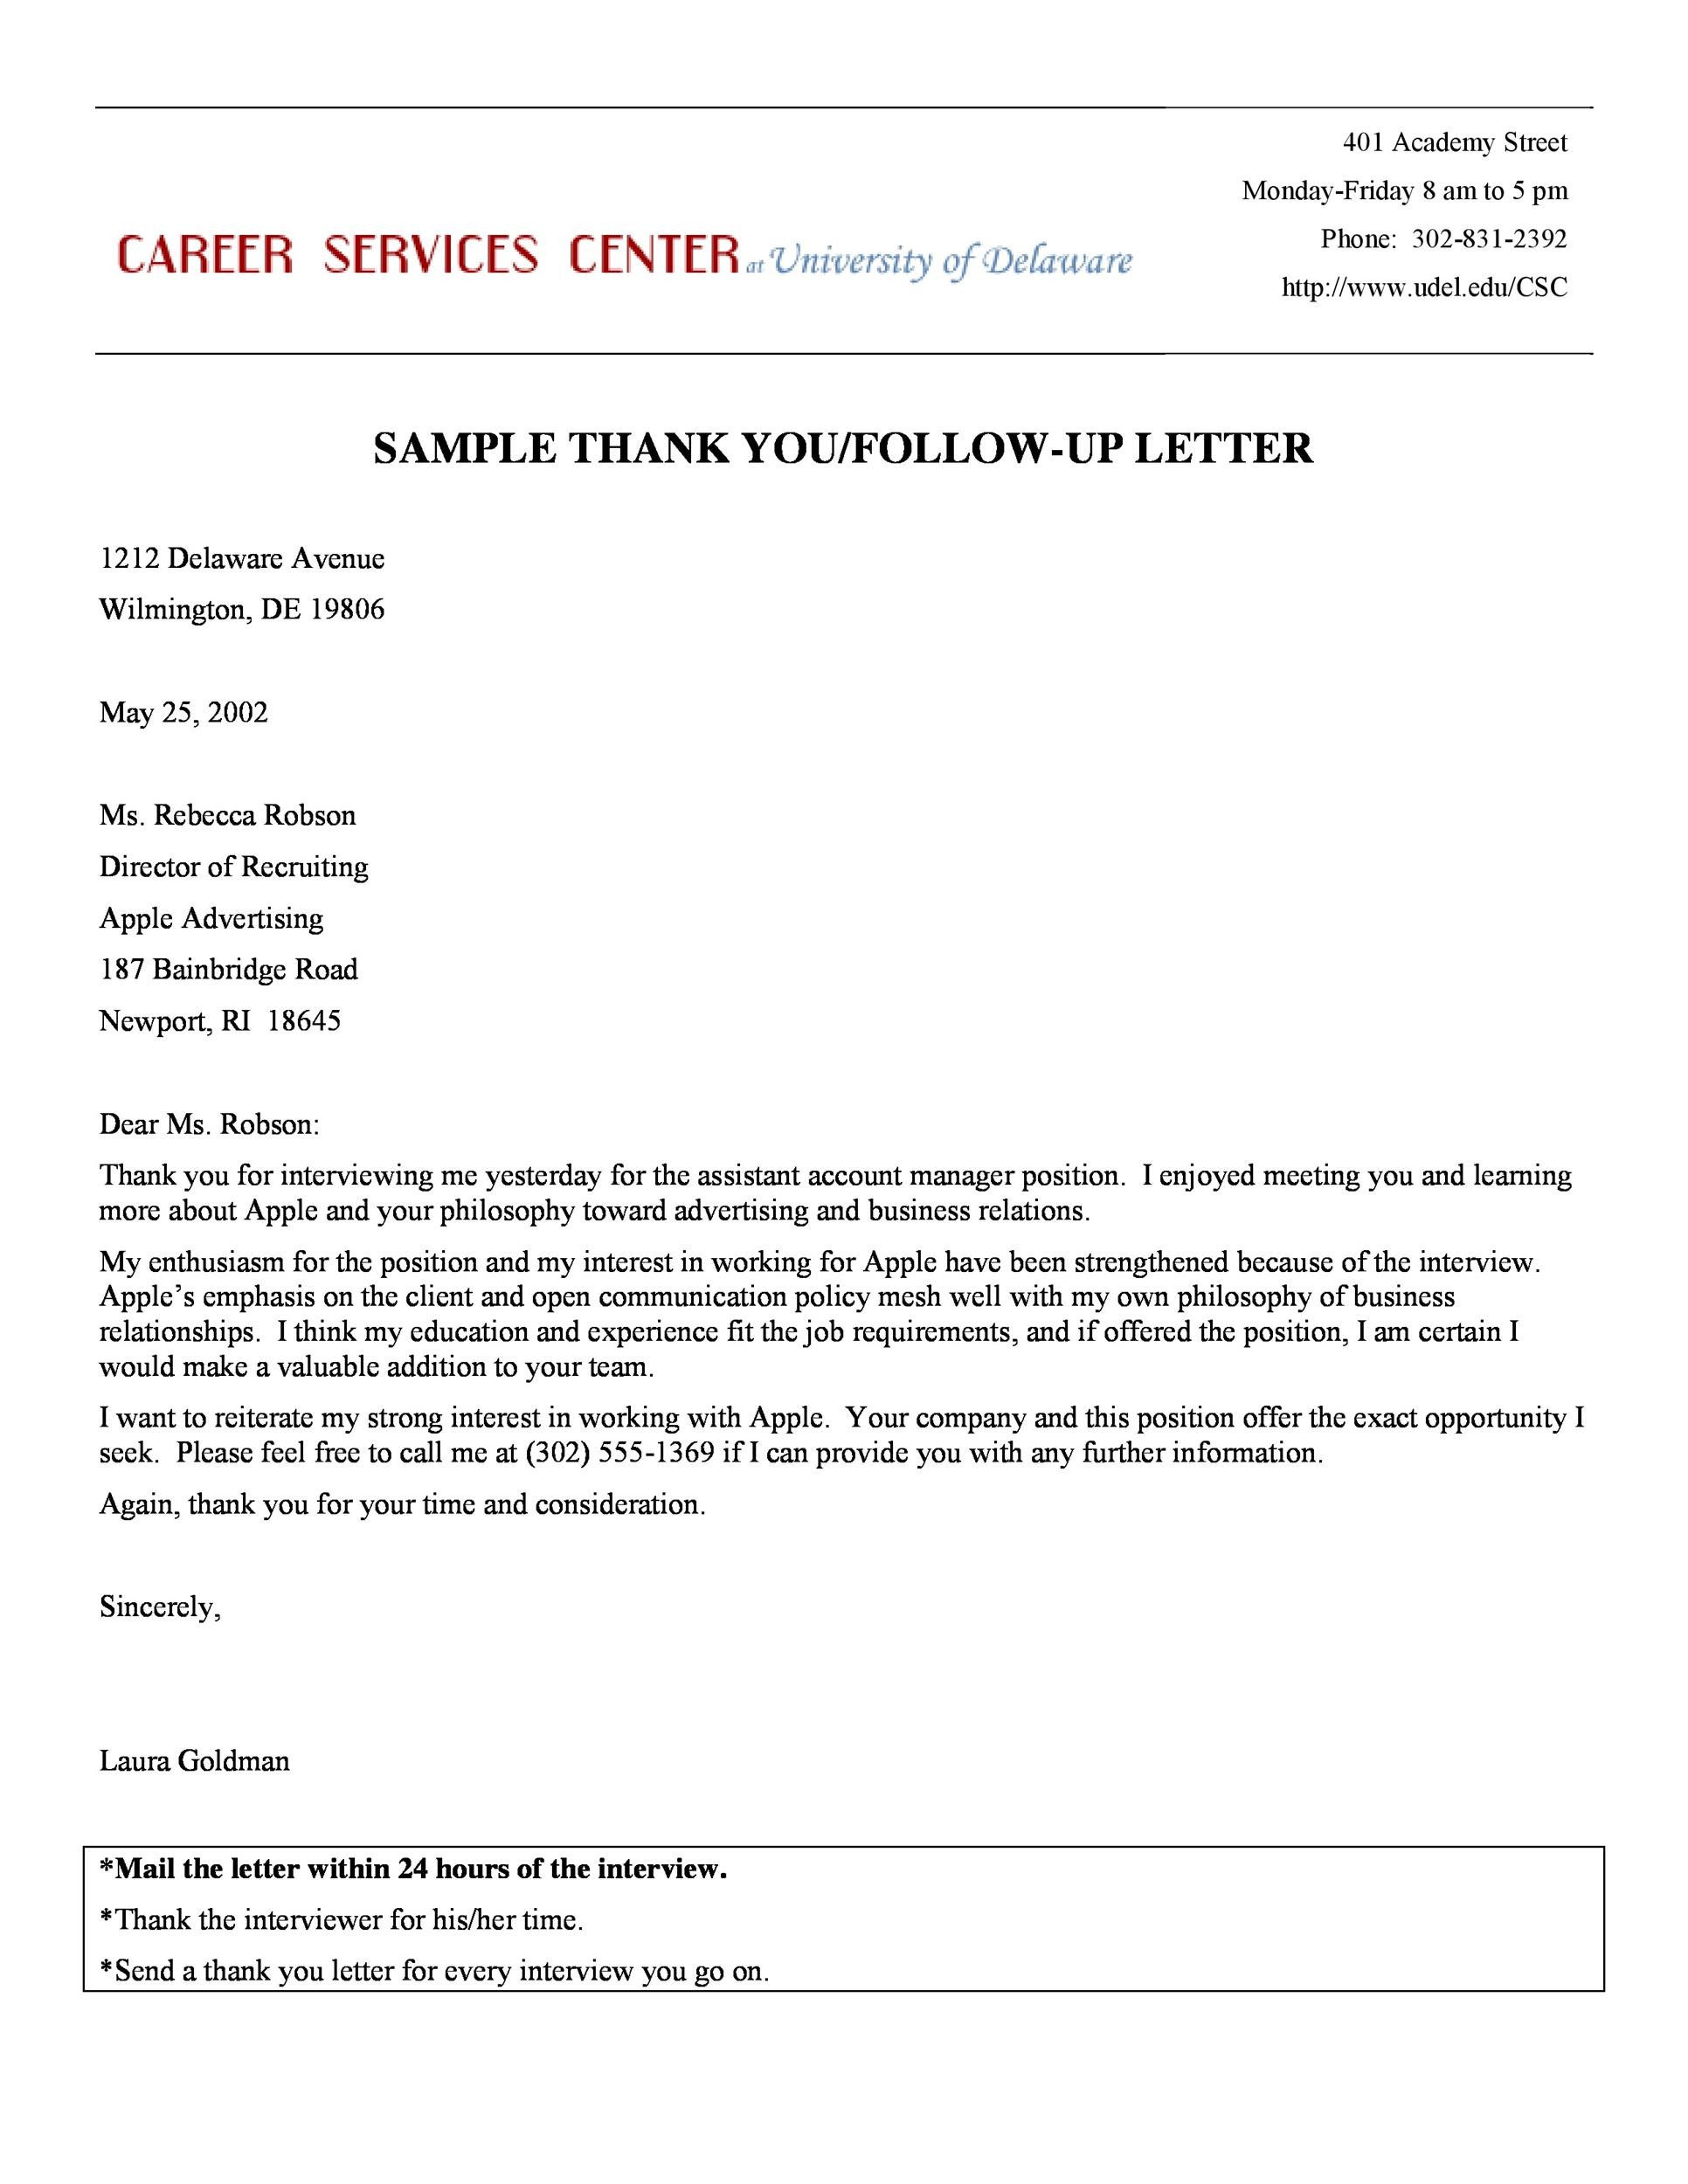 Free Thank you letter 31